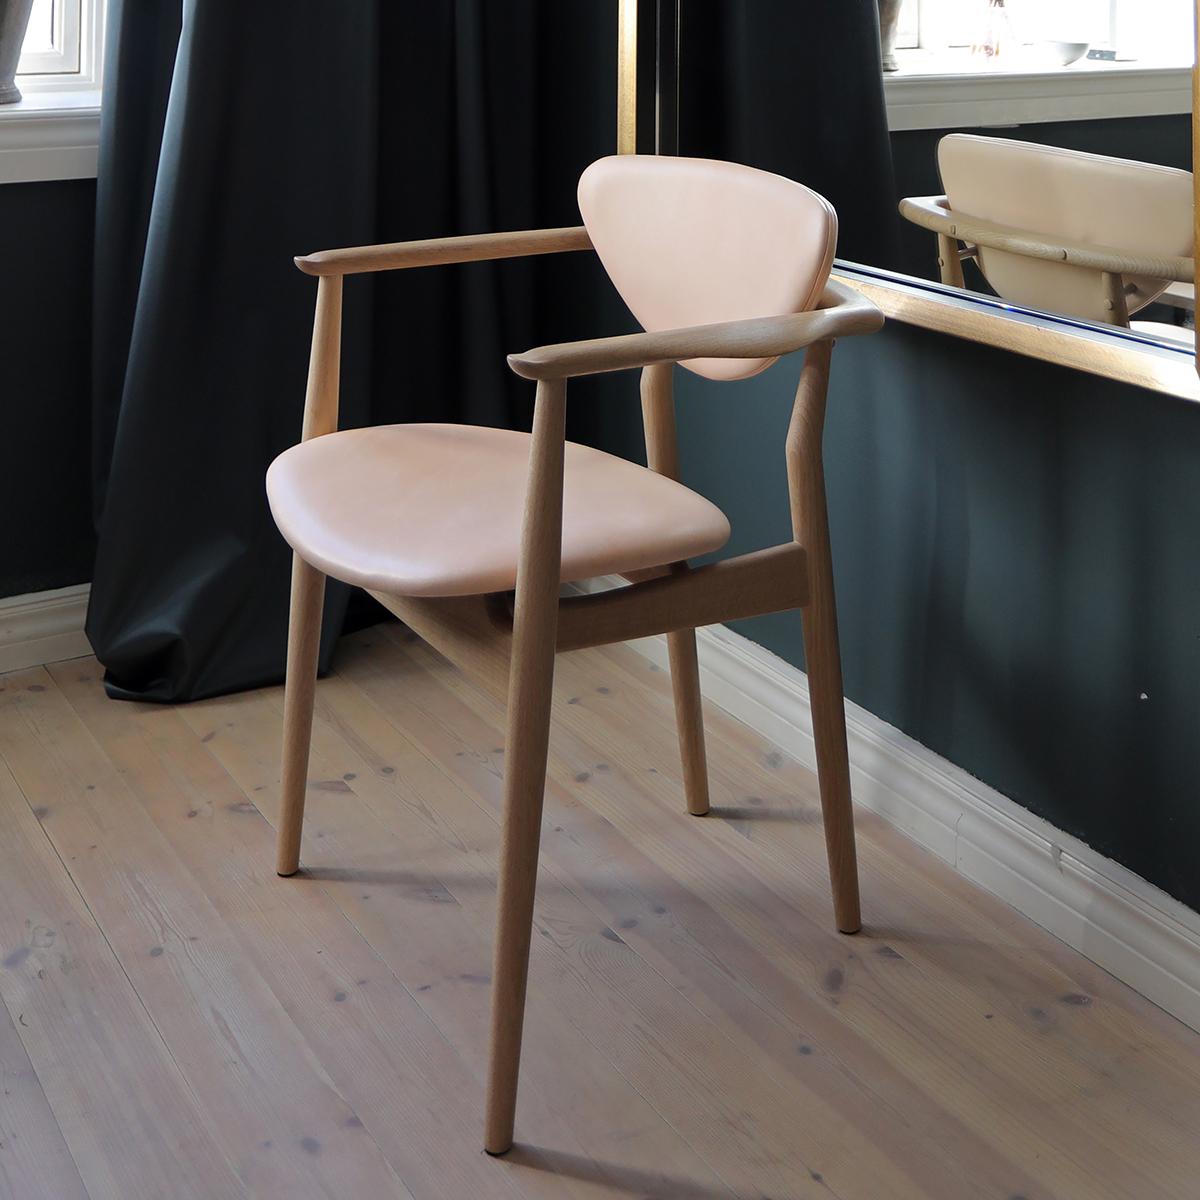 Chair designed by Finn Juhl in 1946, relaunched in 2009.
Manufactured by House of Finn Juhl in Denmark.

The 109 Chair was originally manufactured by cabinetmaker Niels Vodder, just like its close relative the 108 Chair. In this design, it is in